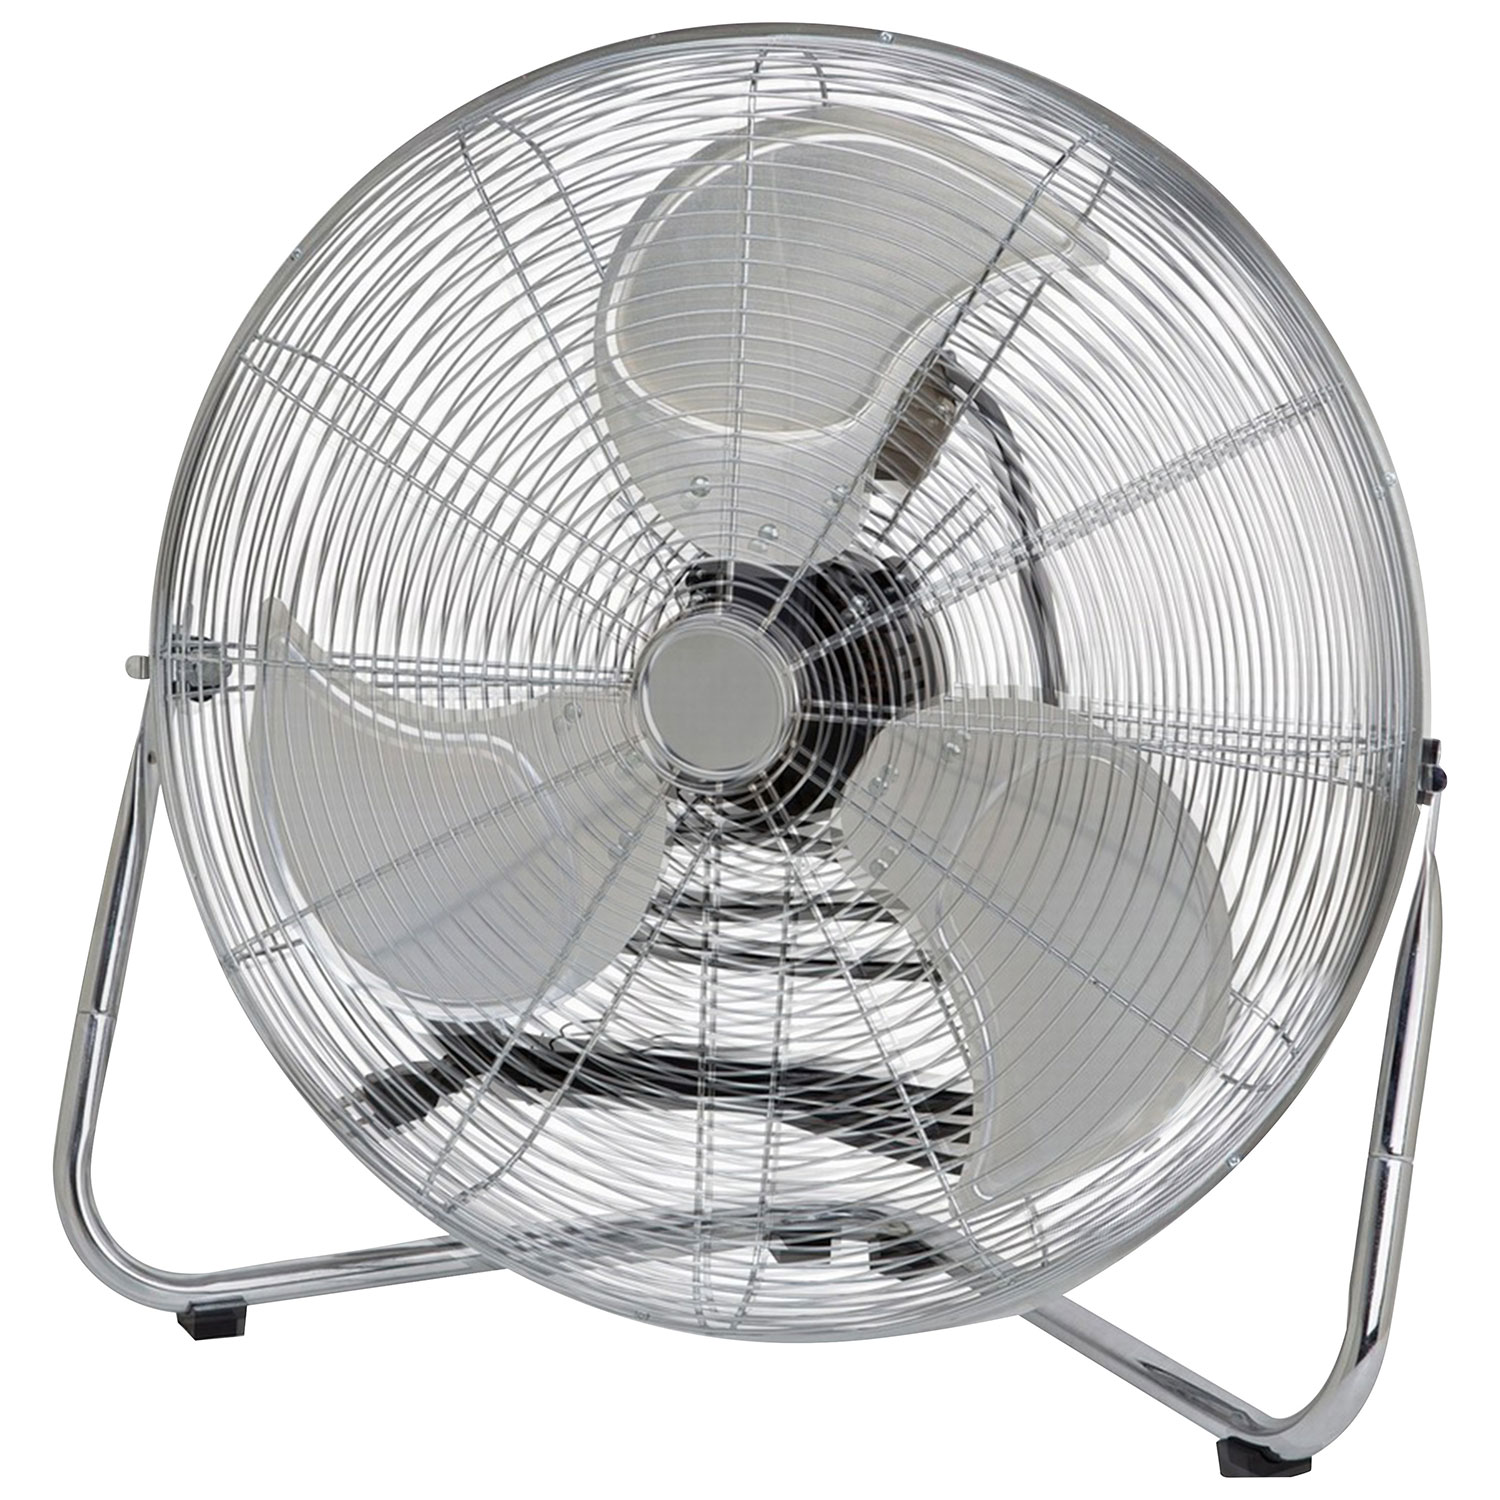 Barmhjertige specifikation pensum What to consider when buying a fan